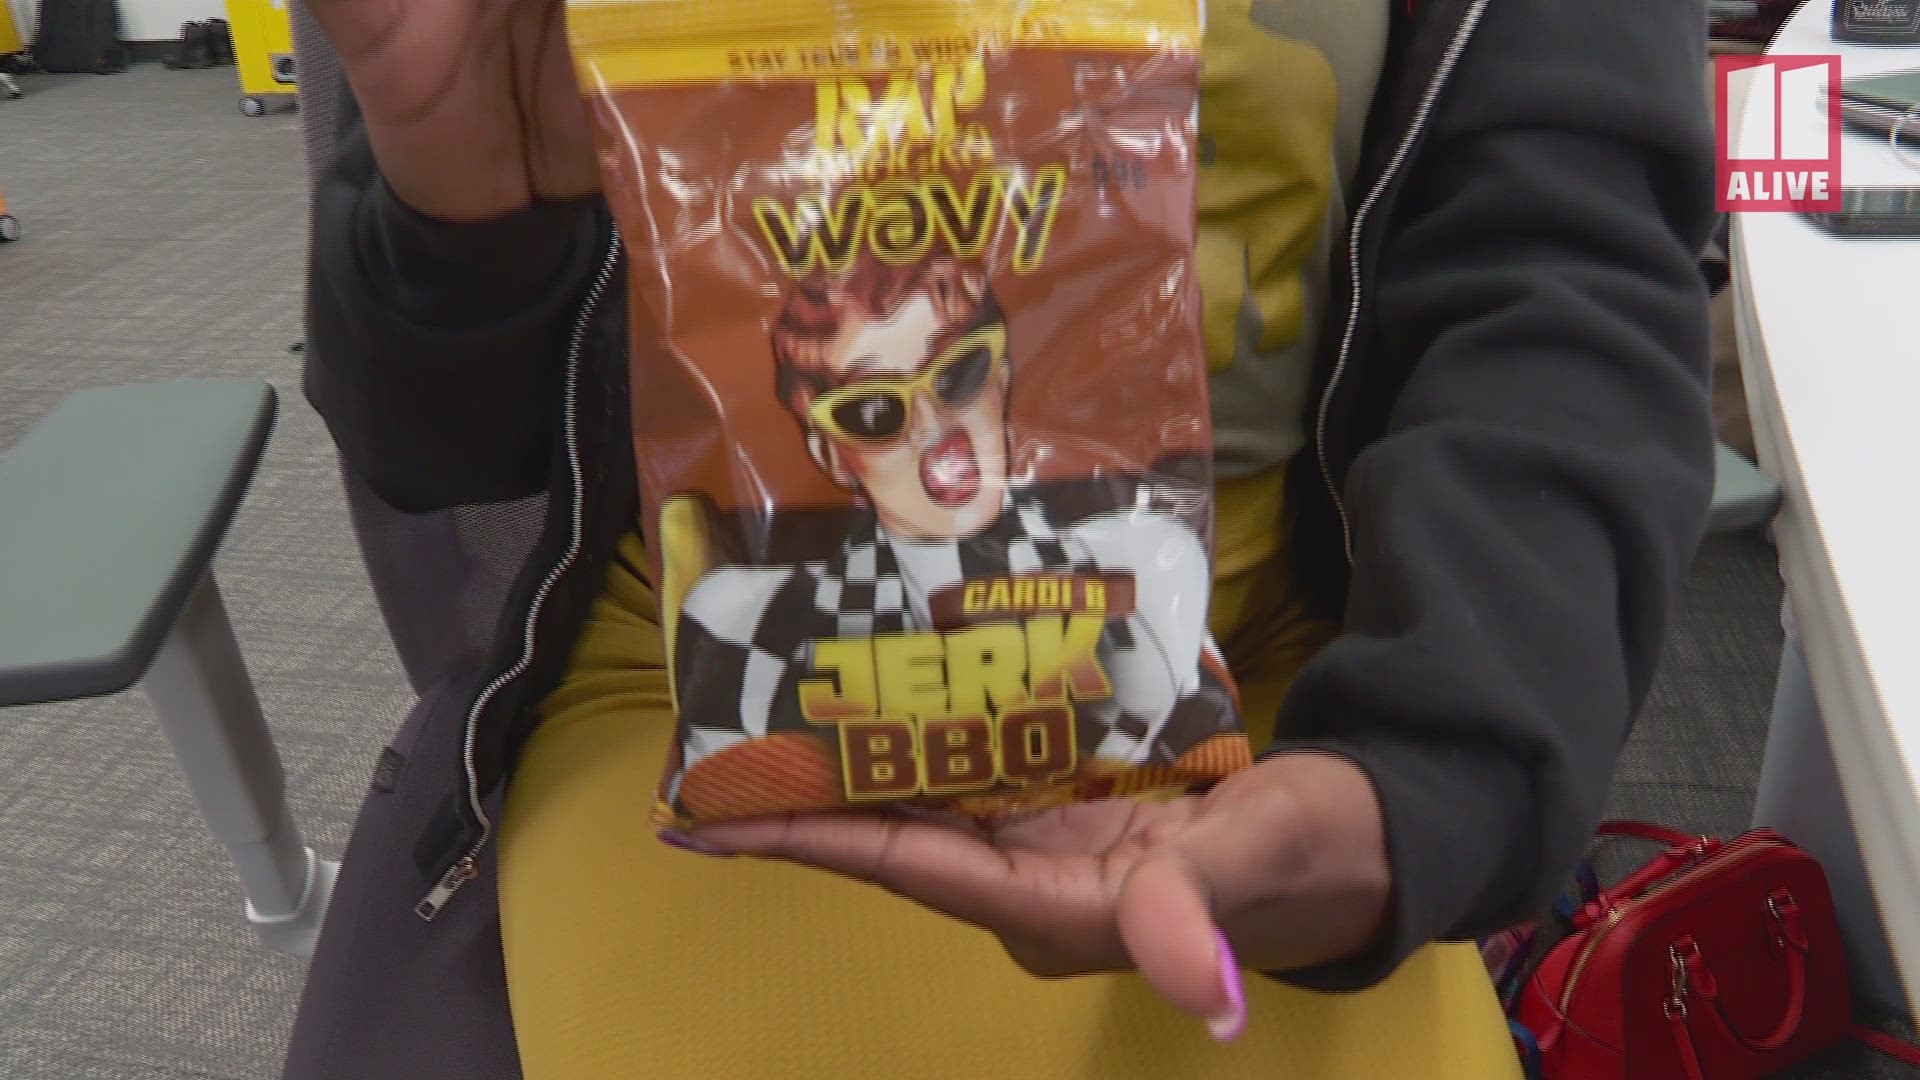 The hip-hop artist whose charismatic personality and breakthrough album catapulted her to fame, has teamed up with the iconic snacks brand, making her the first artist to debut with four flavors: Cheddar Bar-B-Que Flavored Potato Chips, Jerk BBQ Wavy Potato Chips, Honey Drip Butter Popcorn and Habanero Hot Cheese Popcorn.